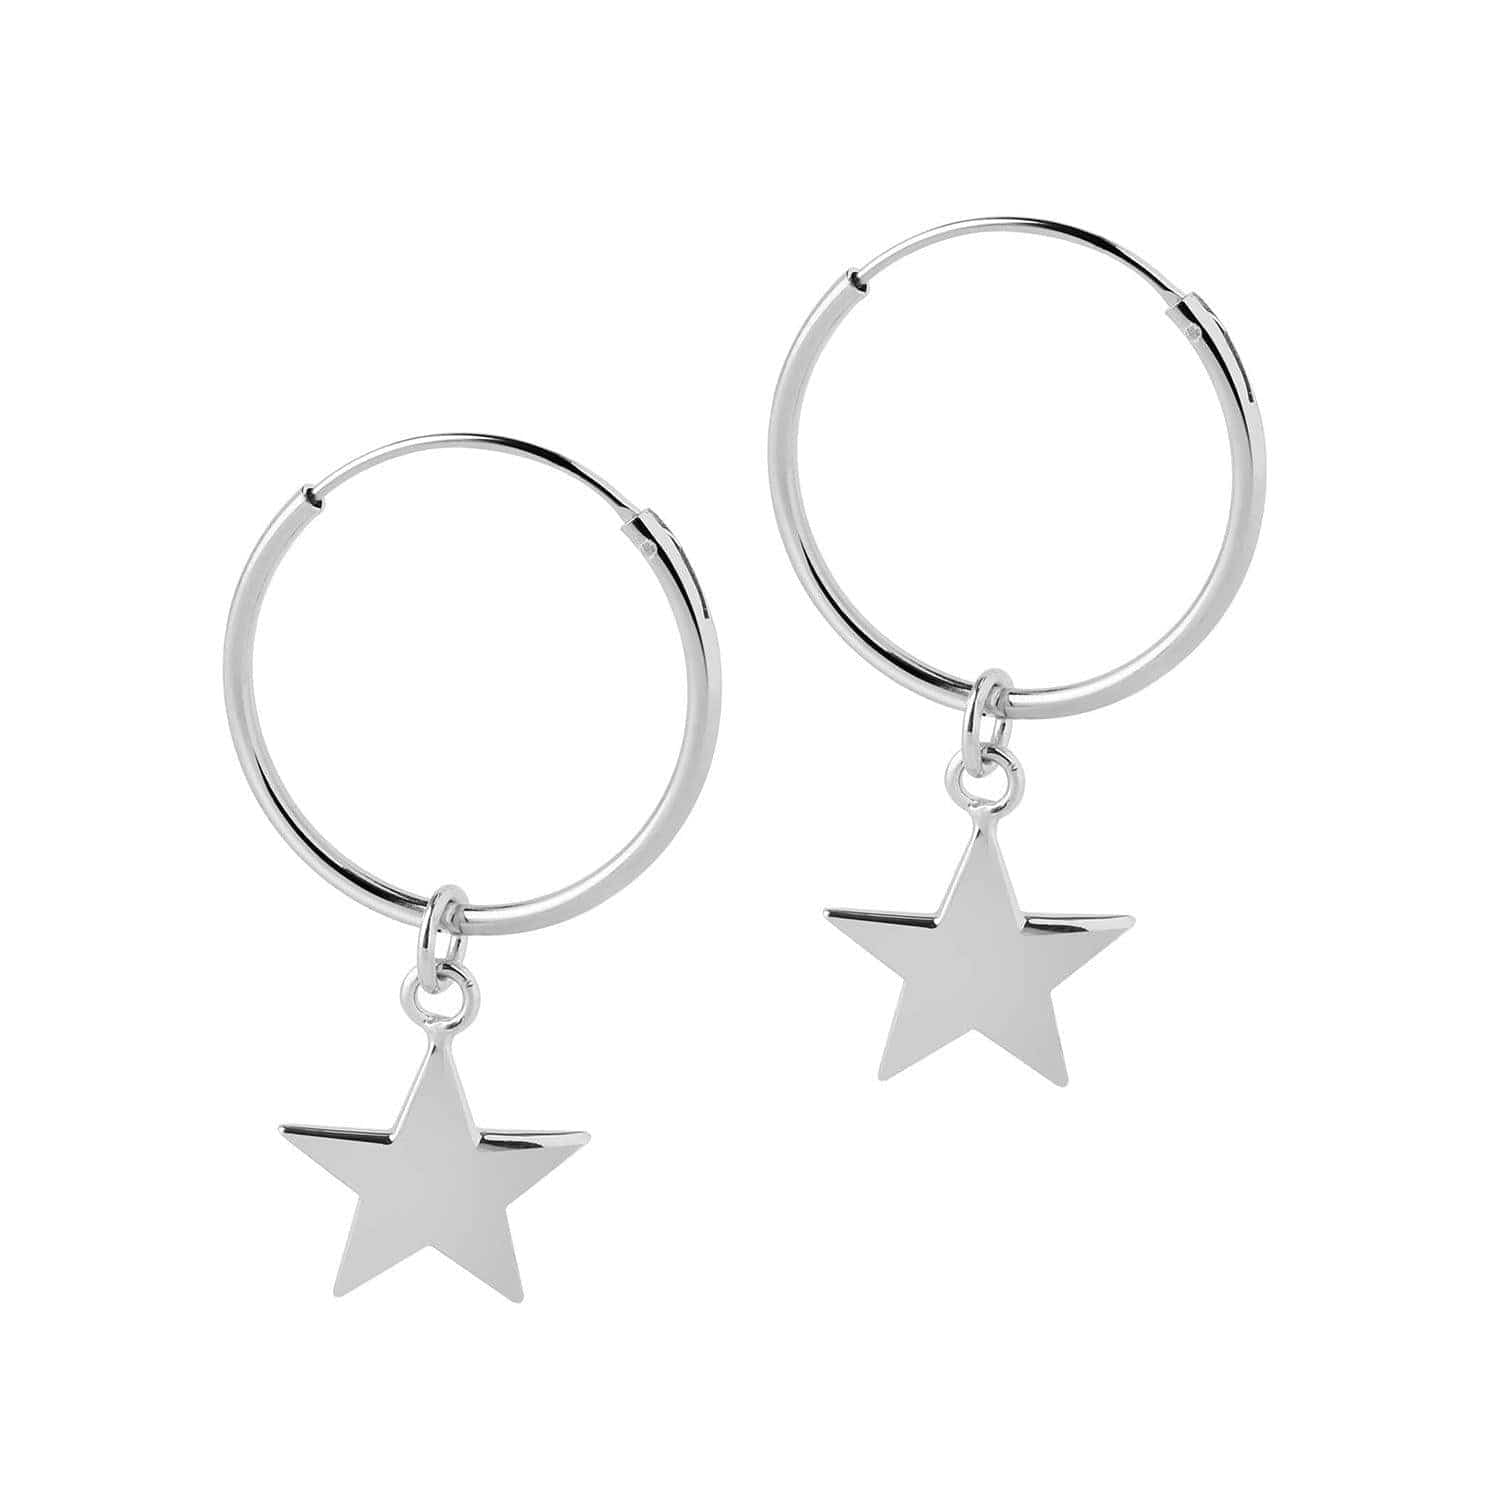 Gold Plated Hoop Earrings with Star 18 MM - Juulry.com